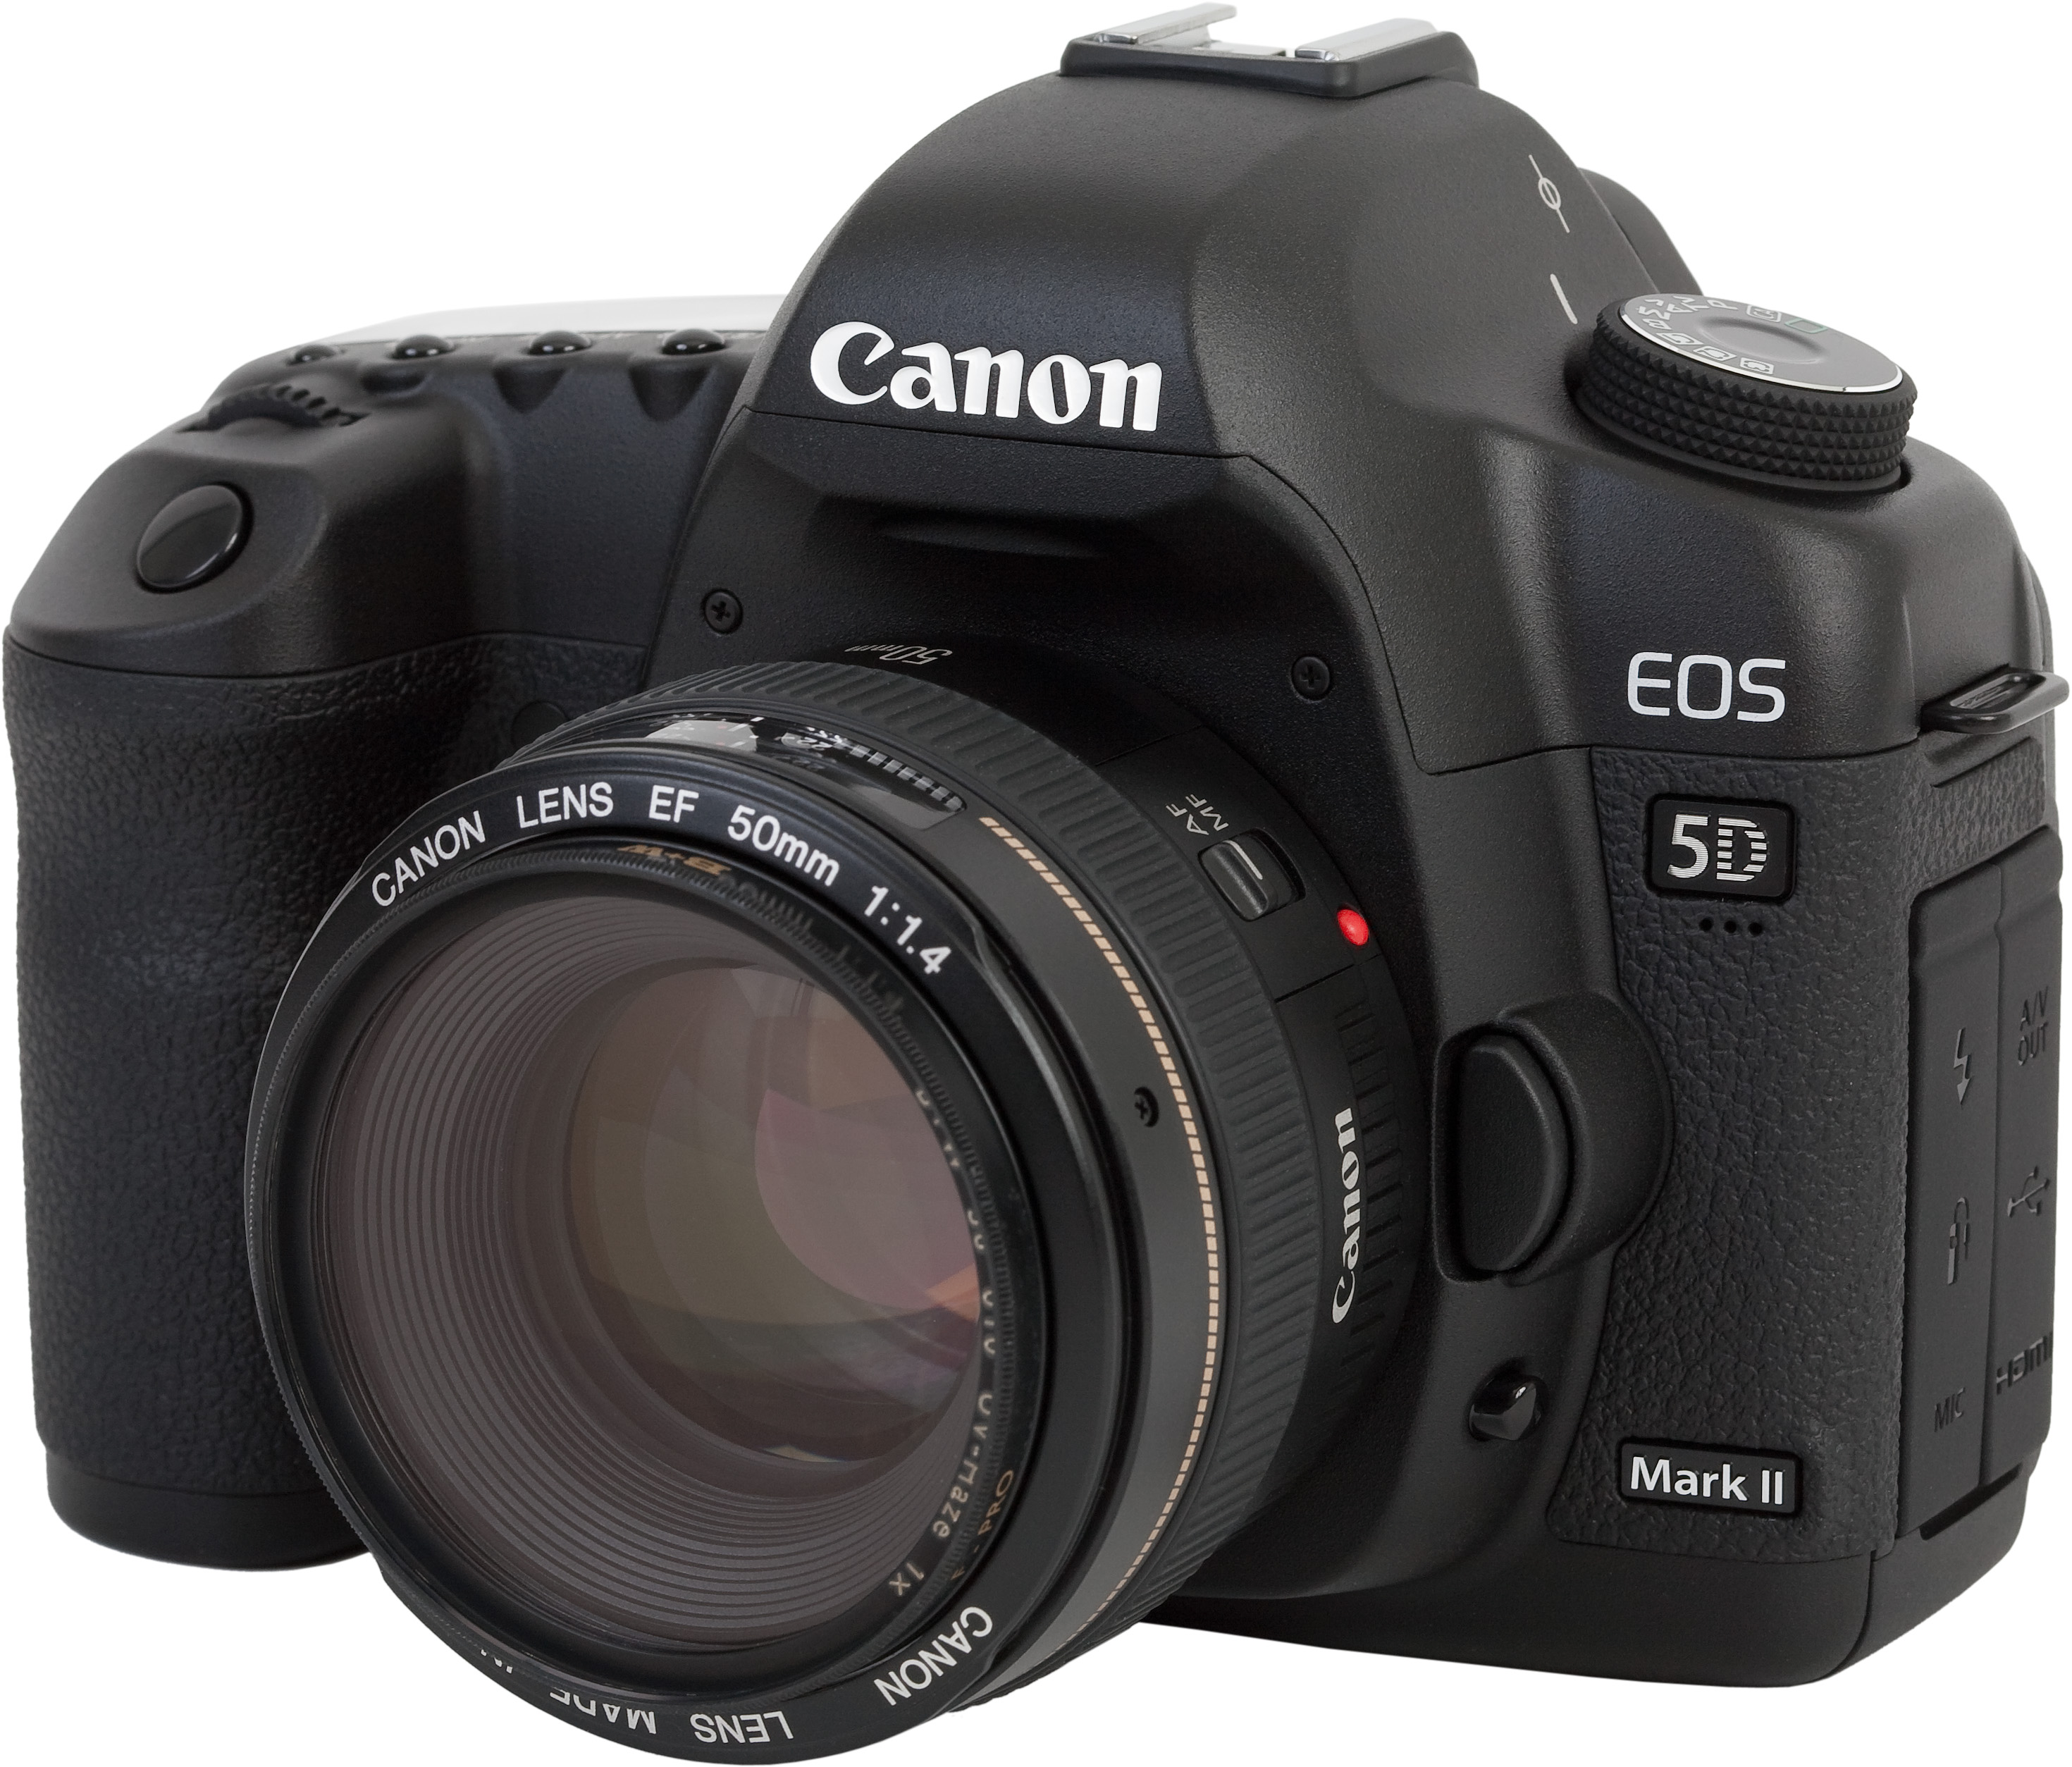 File:Canon EOS 5D Mark II with 50mm 1.4.jpg - Wikipedia